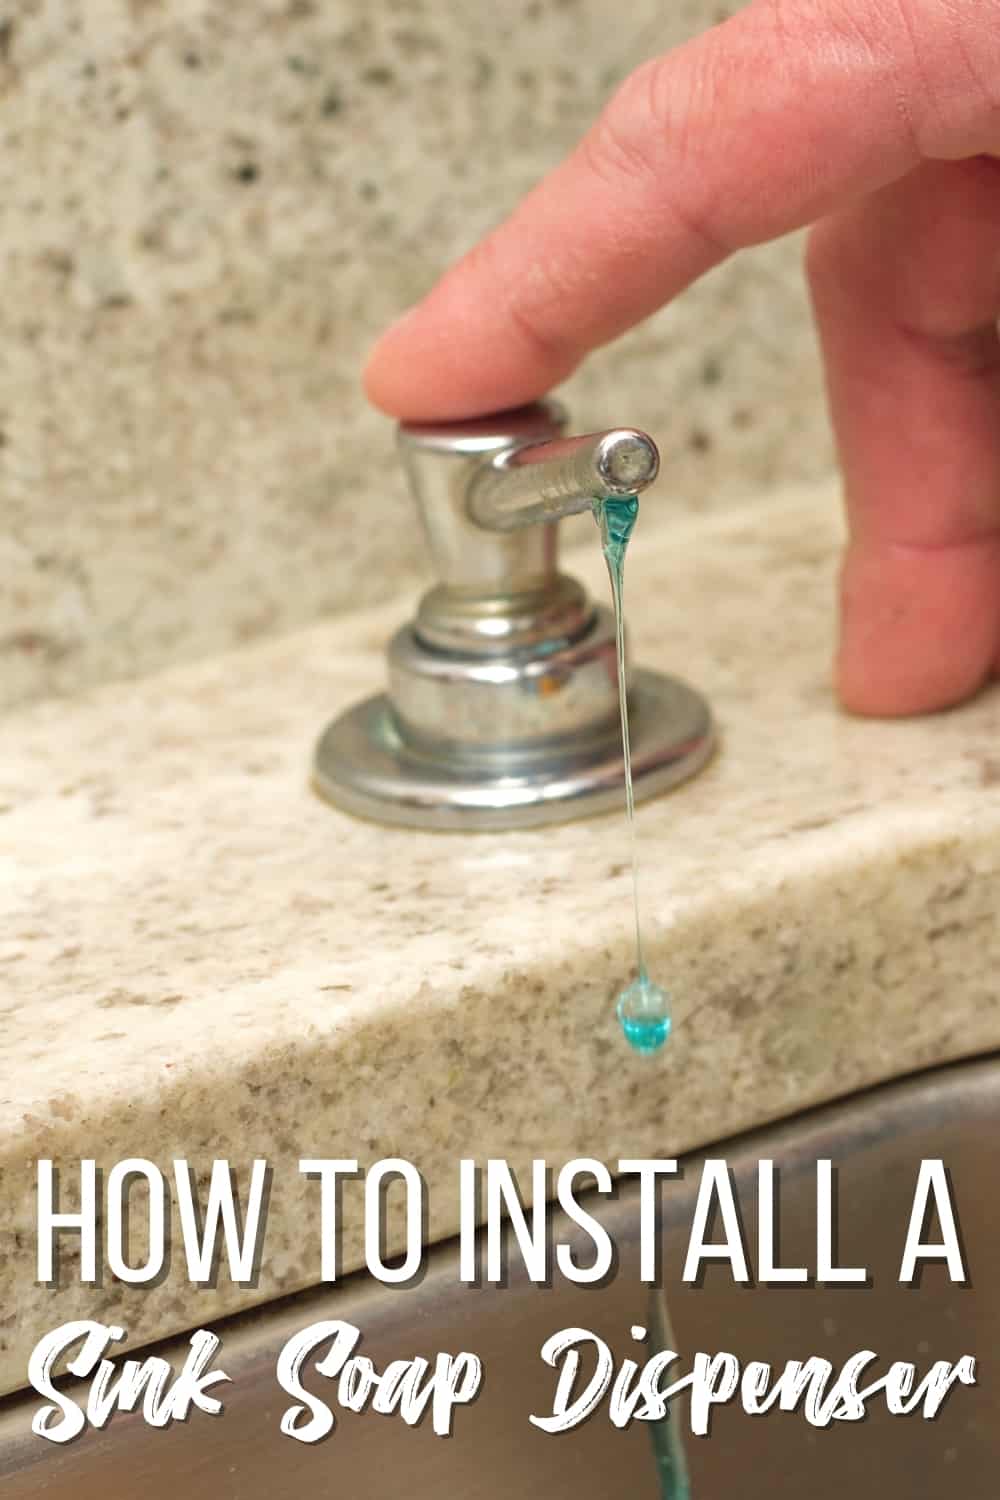 How to install a kitchen sink soap dispenser